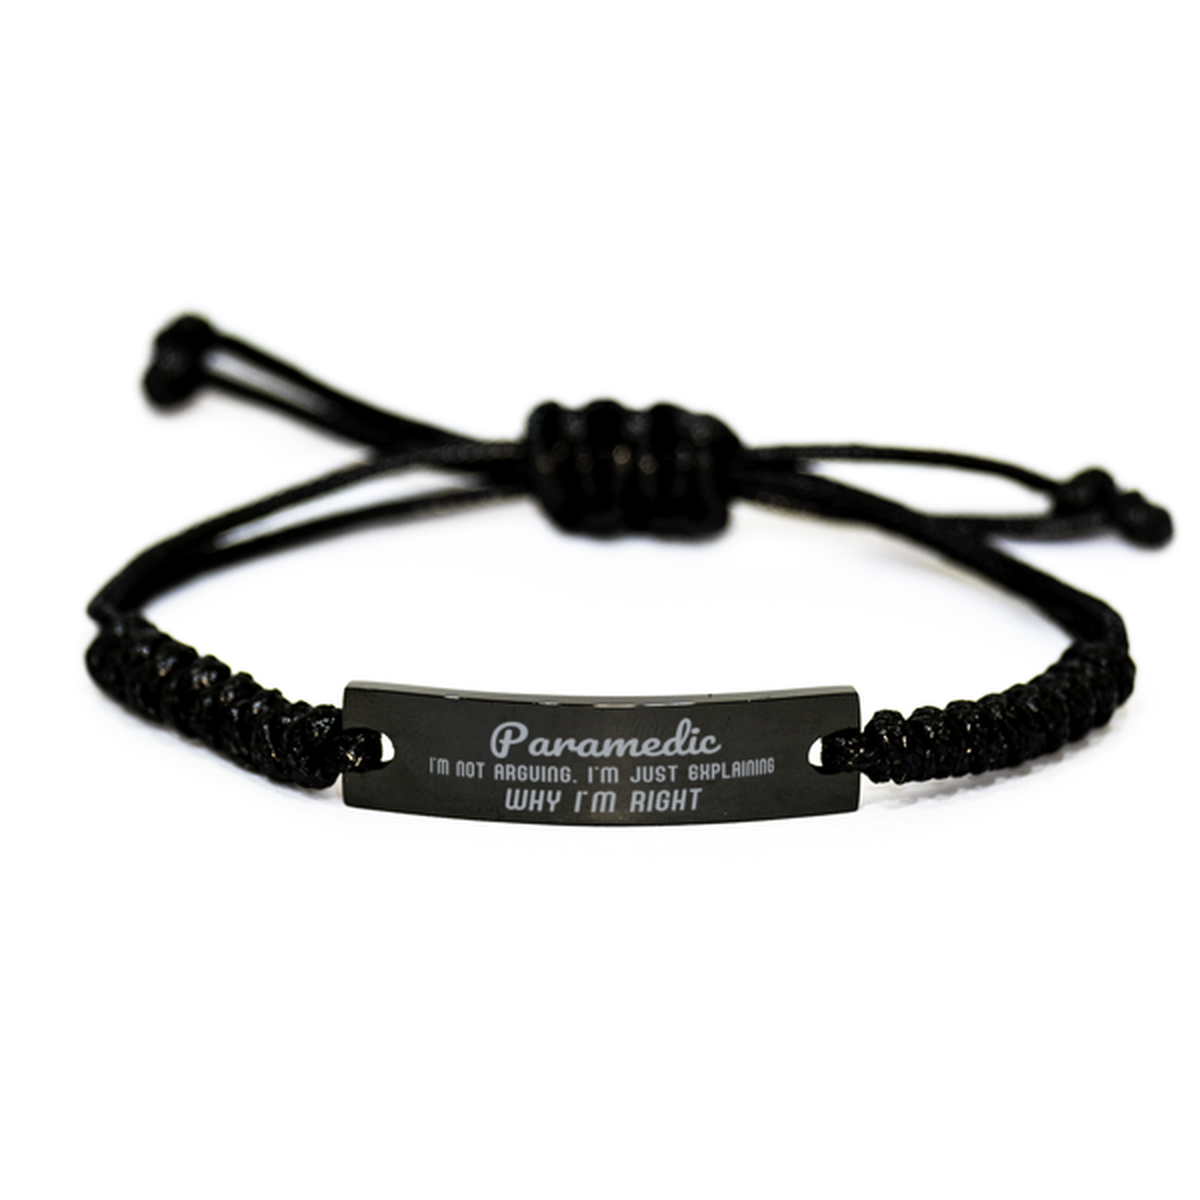 Paramedic I'm not Arguing. I'm Just Explaining Why I'm RIGHT Black Rope Bracelet, Funny Saying Quote Paramedic Gifts For Paramedic Graduation Birthday Christmas Gifts for Men Women Coworker